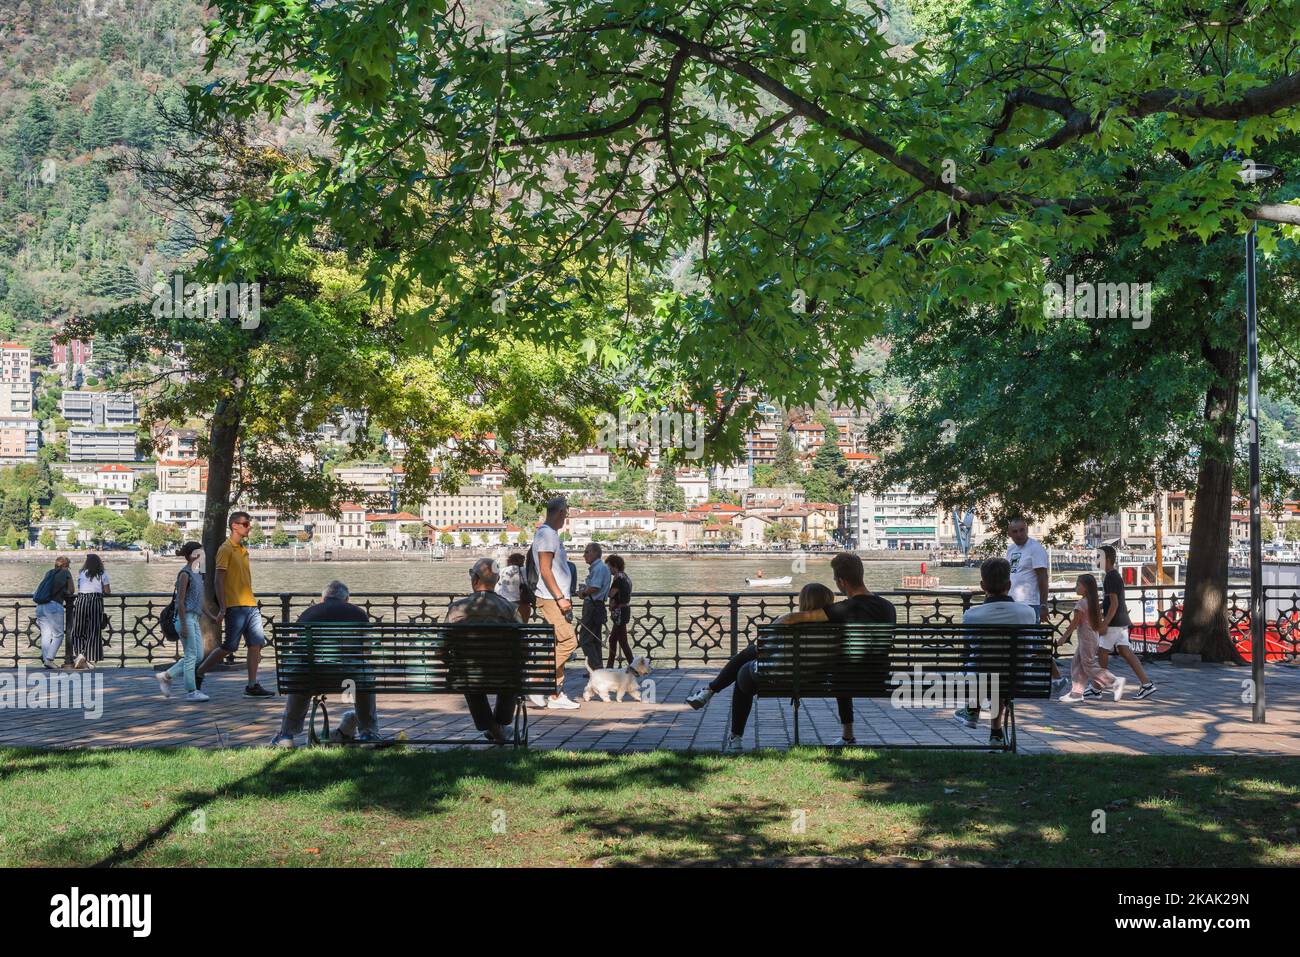 Park people summer, view of people in the Giardini del Tempiano Voltiano enjoying a sunny afternoon beside Lake Como, city of Como, Lombardy, Italy Stock Photo